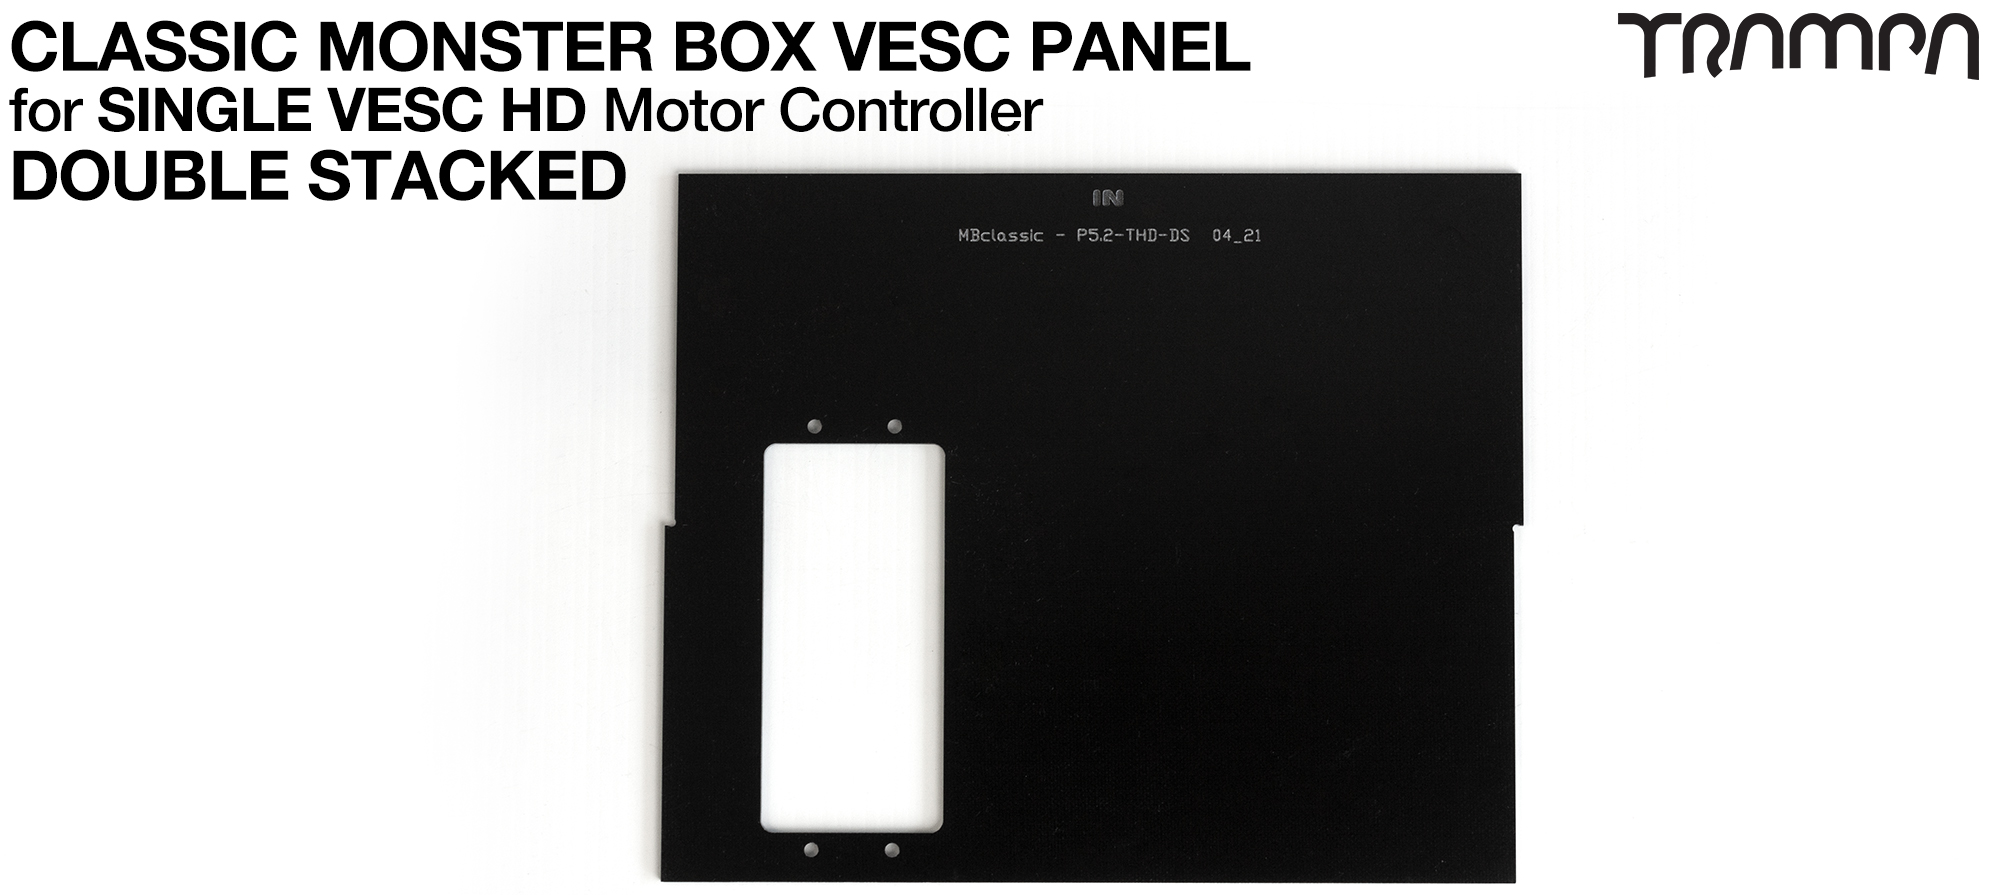 DOUBLE Stack CLASSIC Box - Panel to fit 1x VESC  HD60-Twin